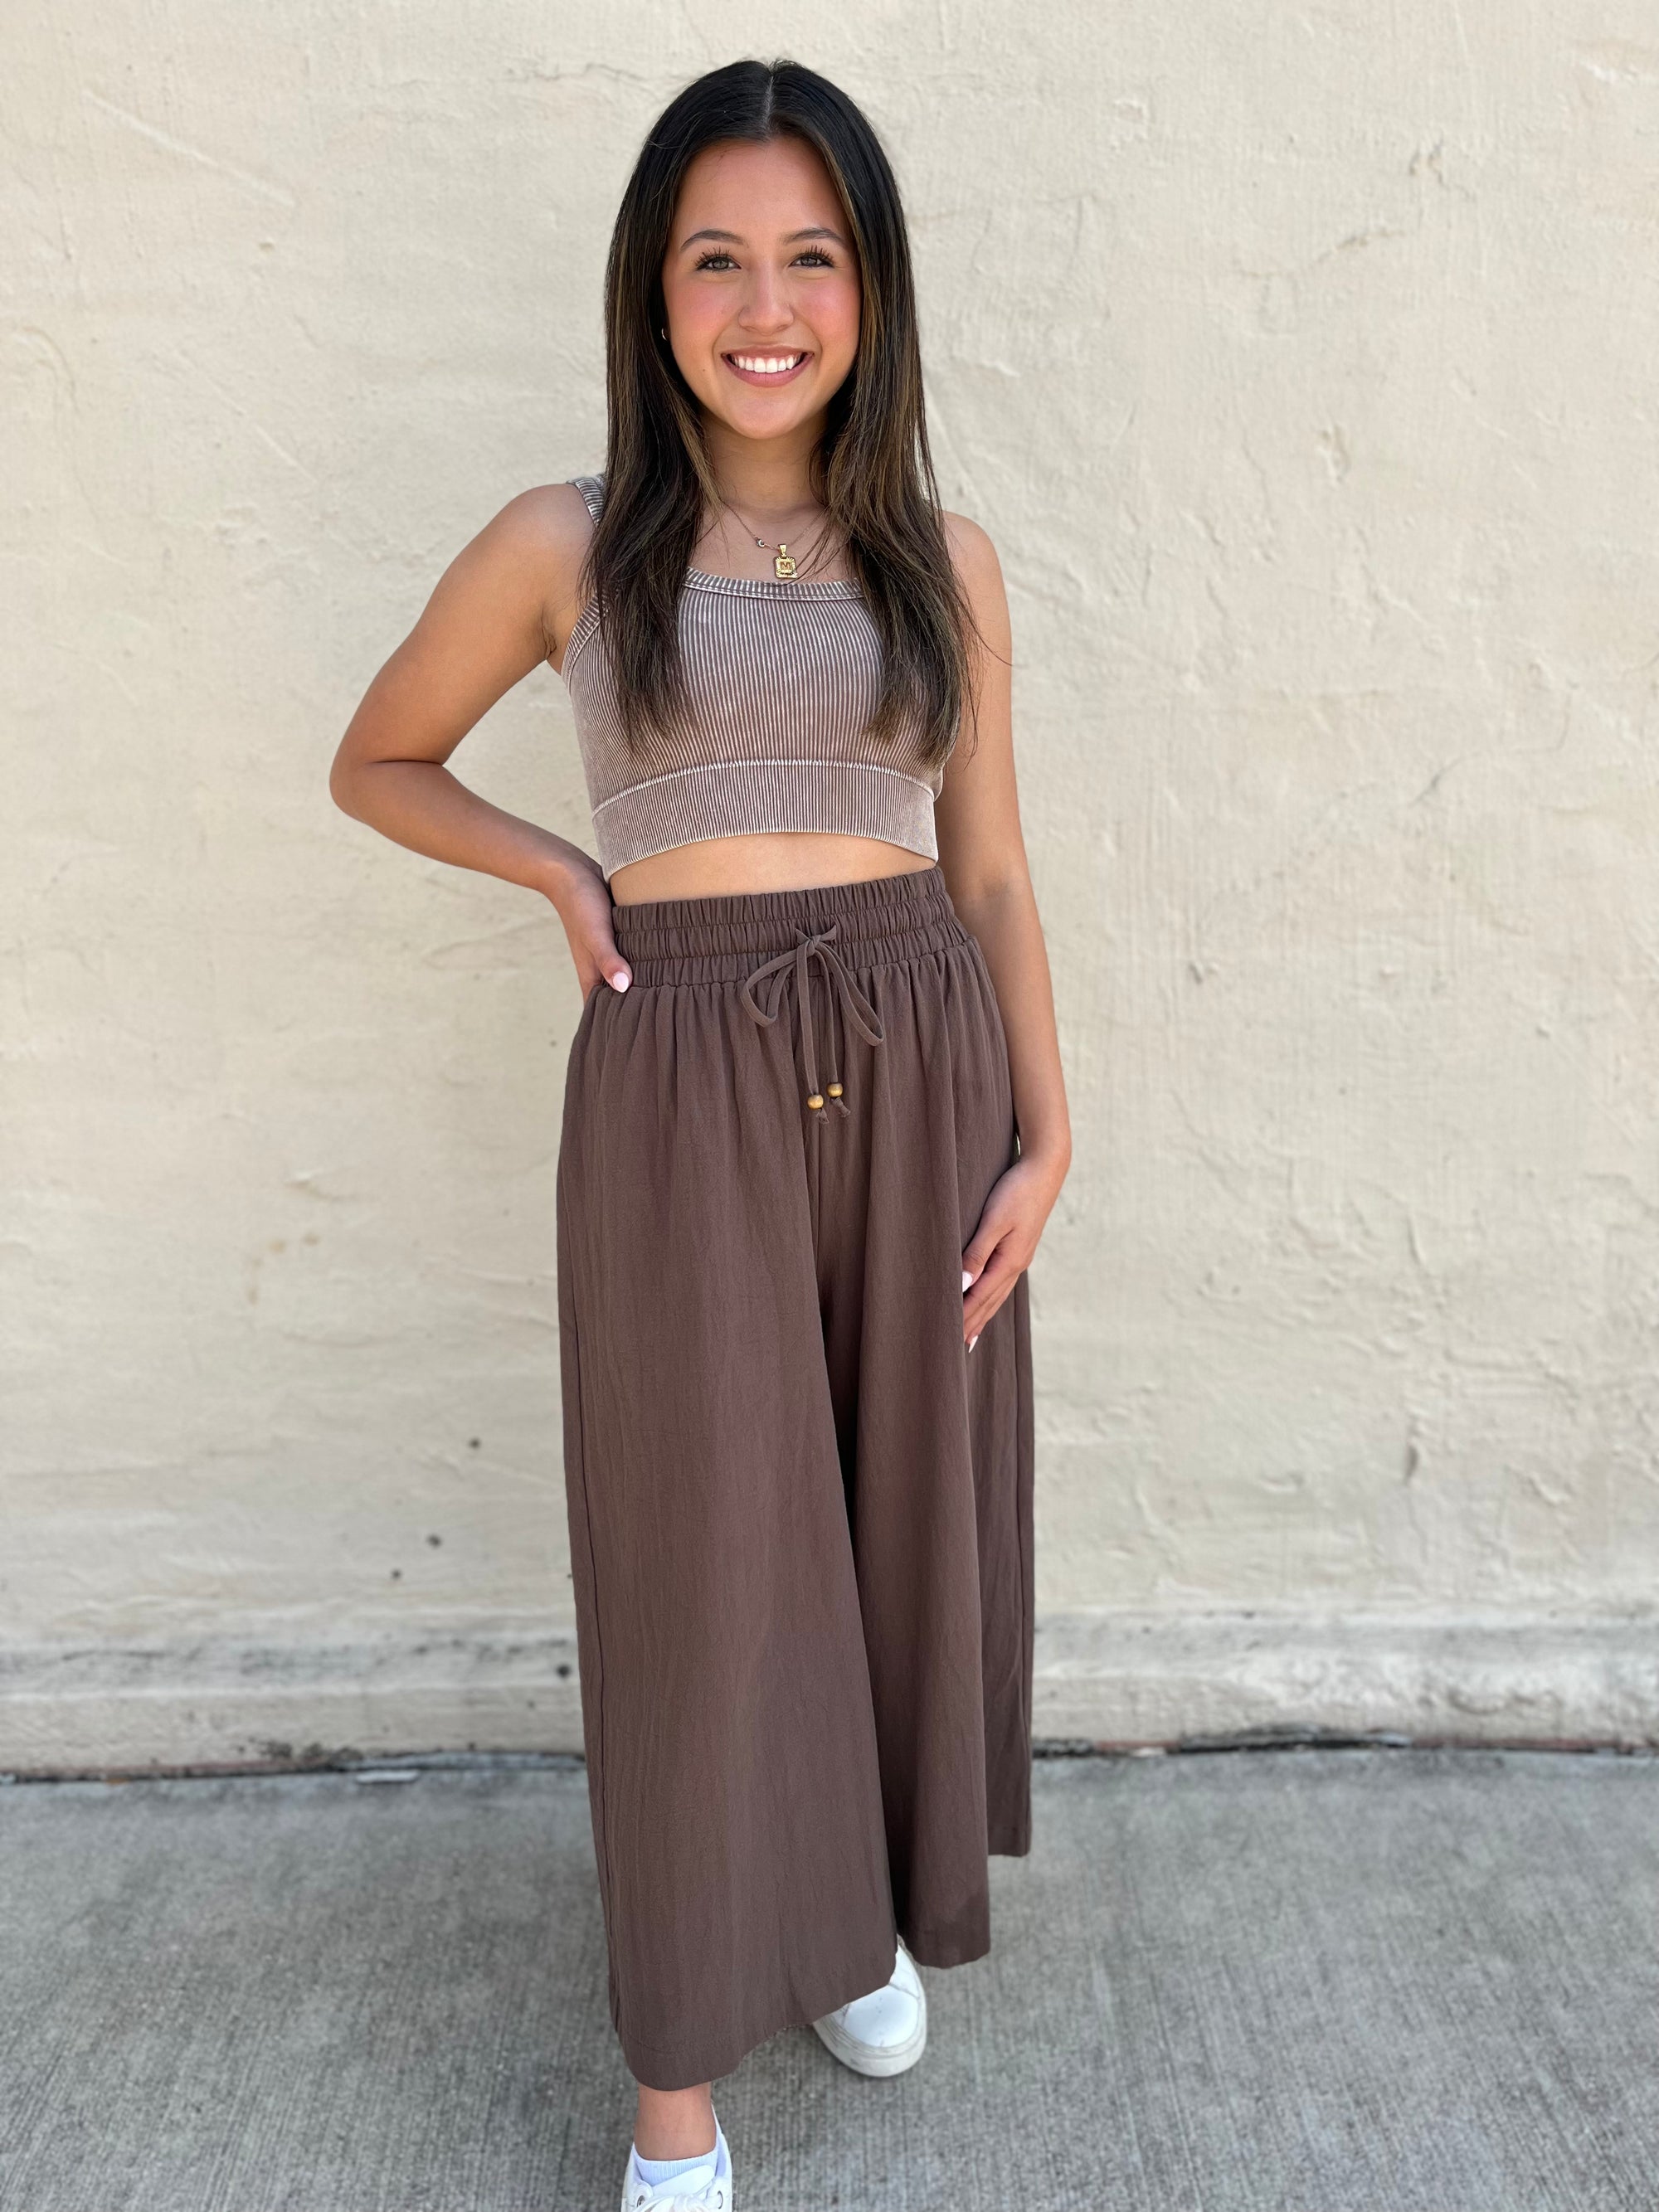 Mustard Seed The Girl From Yesterday Wide Leg Pants - Cocoa